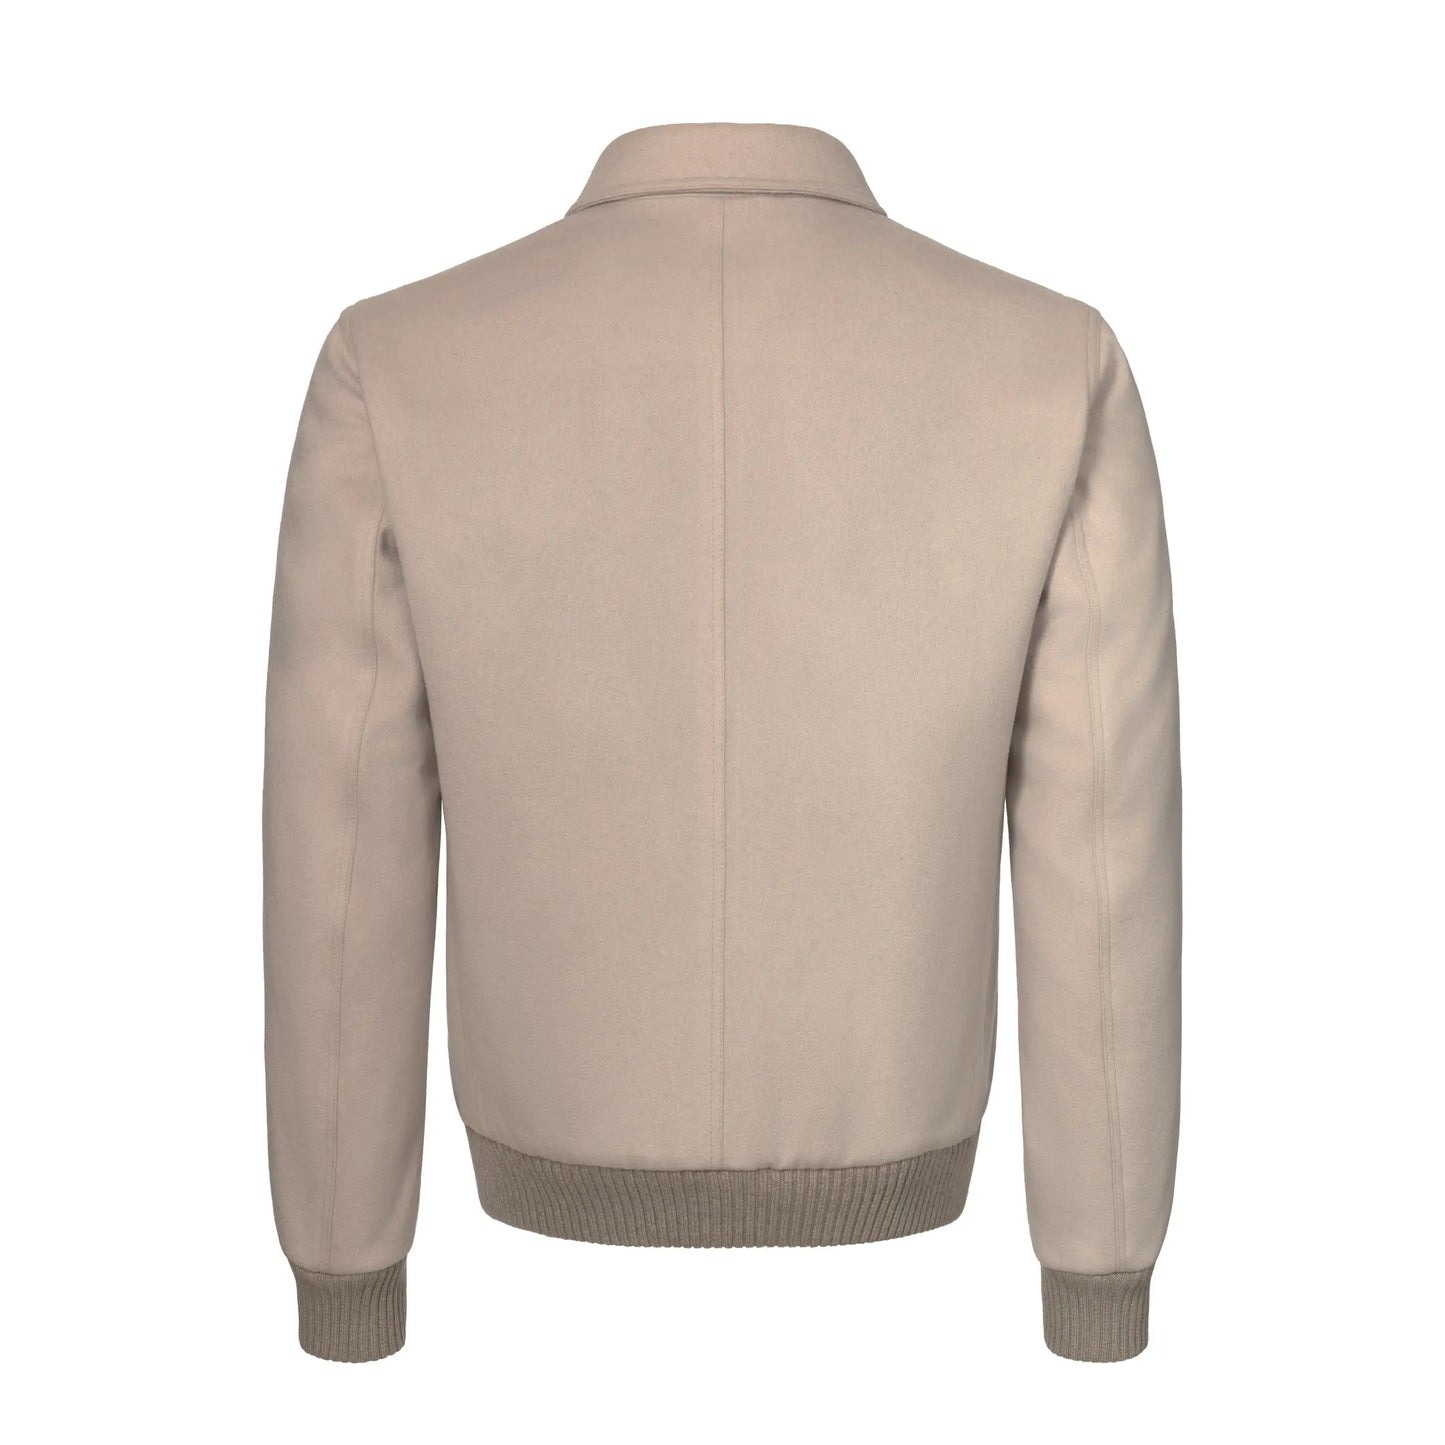 Kired Cashmere and Fur Bomber with Detachable Fur Collar in Ivory - SARTALE